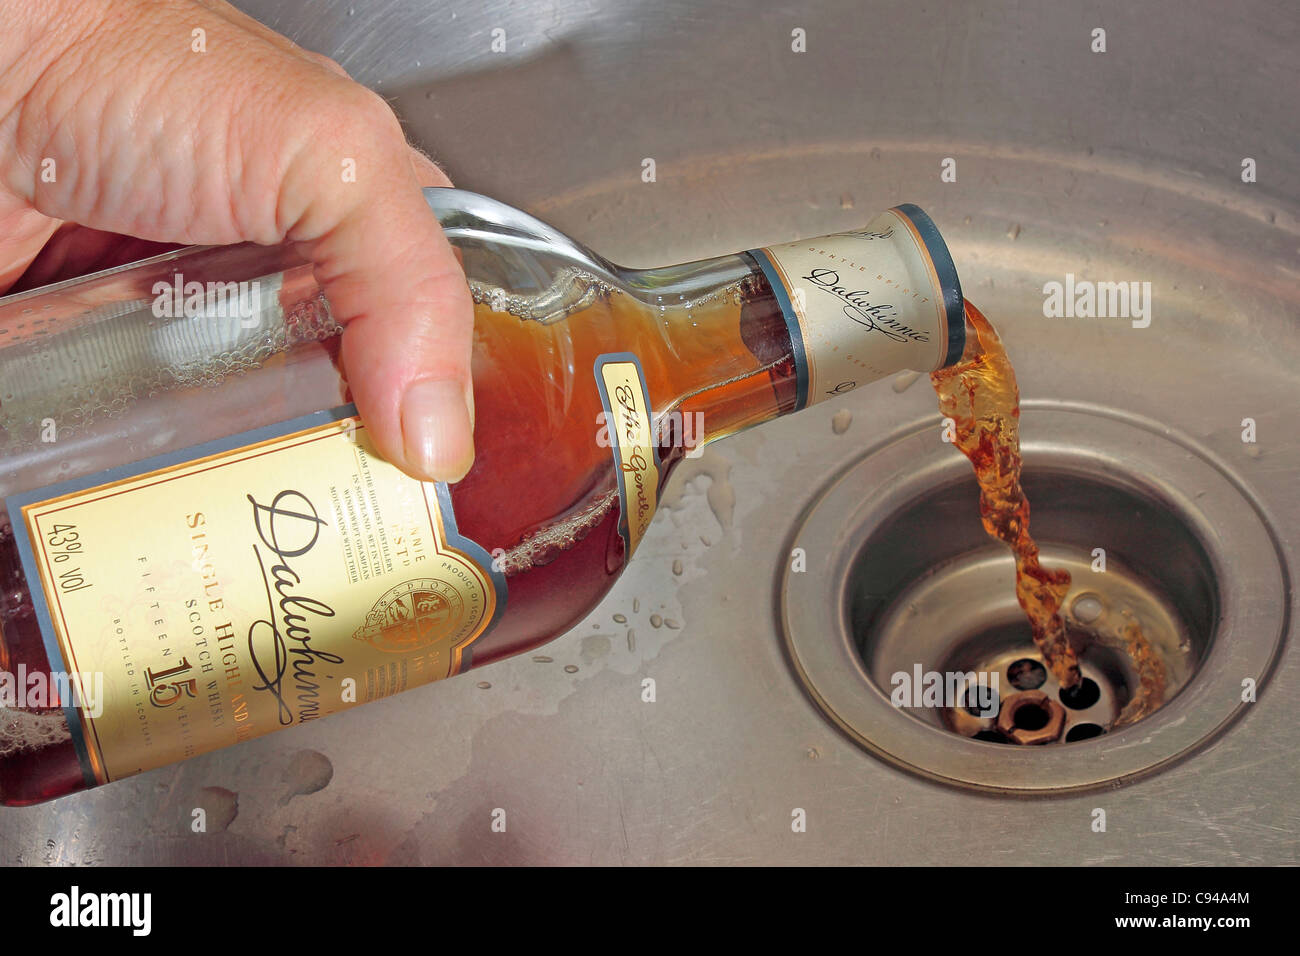 Pouring whisky away down the sink Stock Photo